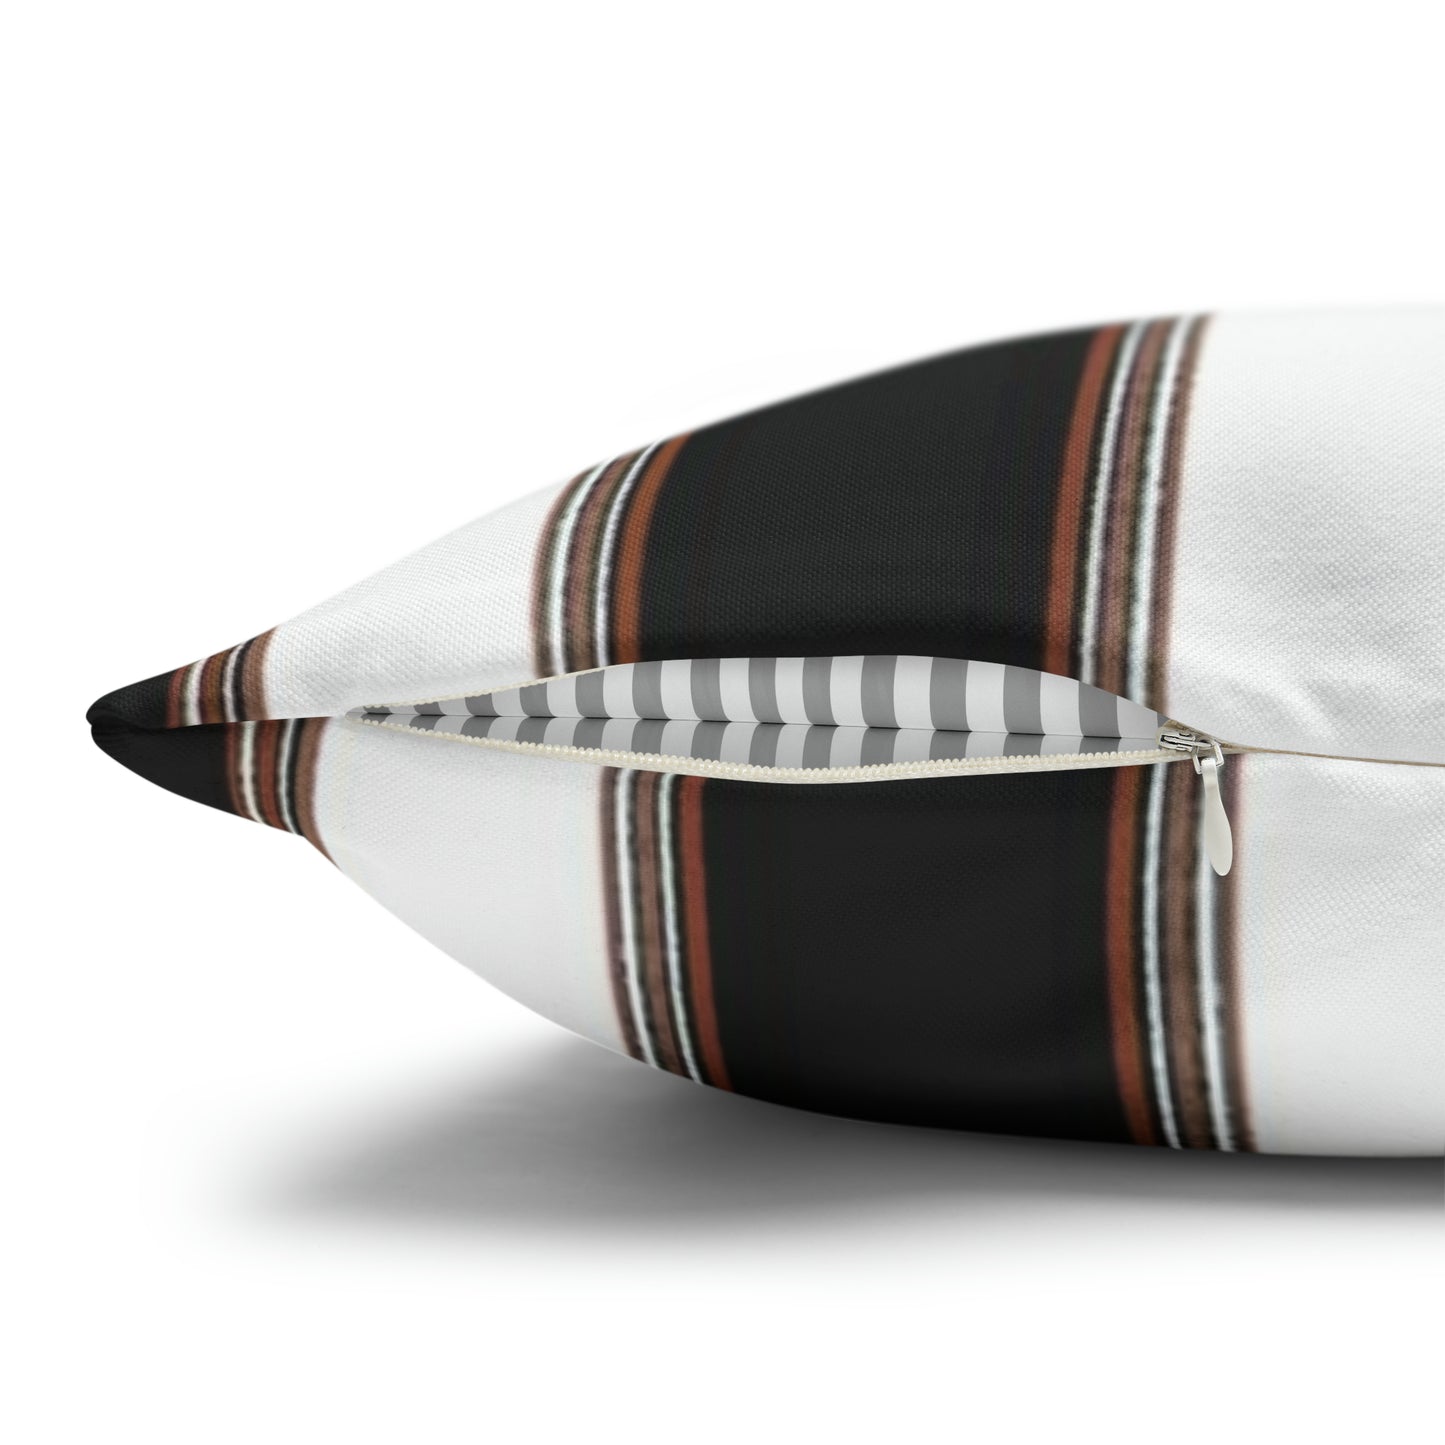 Black and White Stripe Pillow Case Only